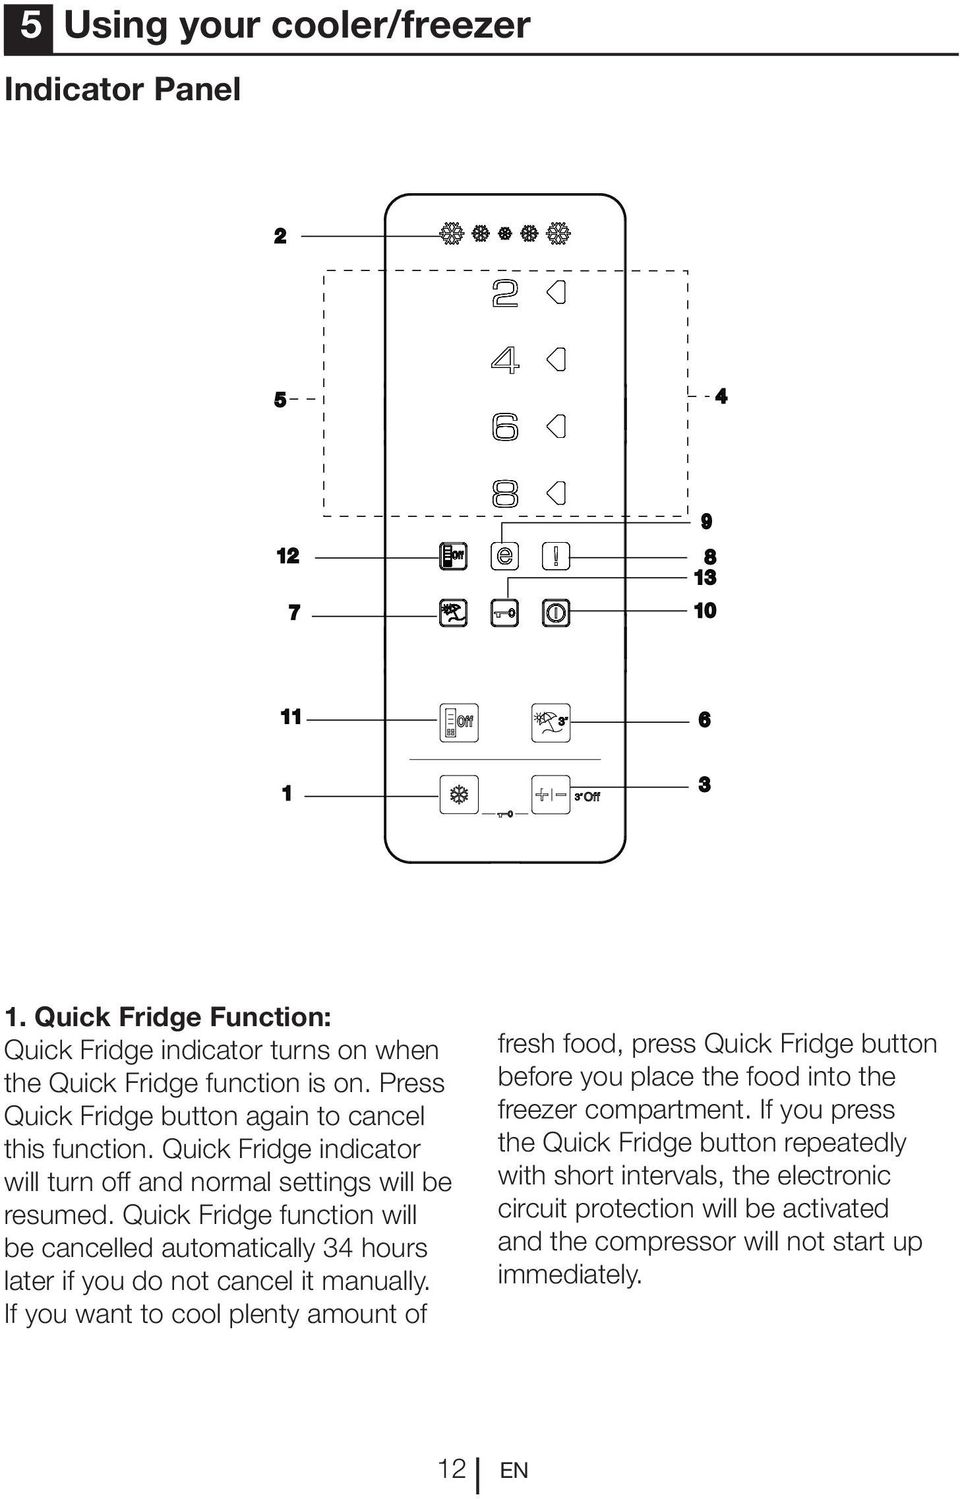 Quick Fridge function will be cancelled automatically 34 hours later if you do not cancel it manually.